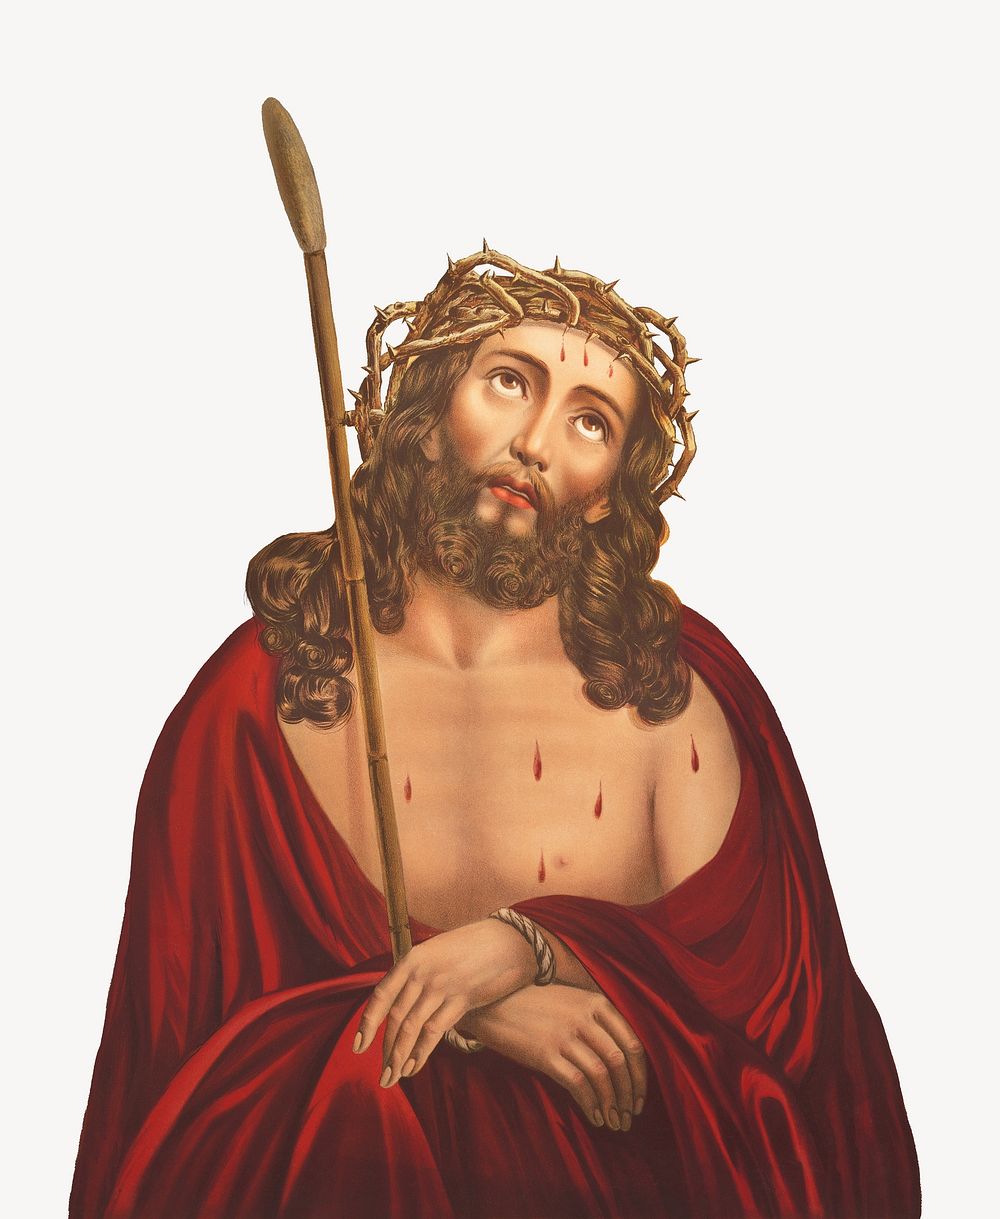 Jesus Christ with crown of thorns.  Remastered by rawpixel